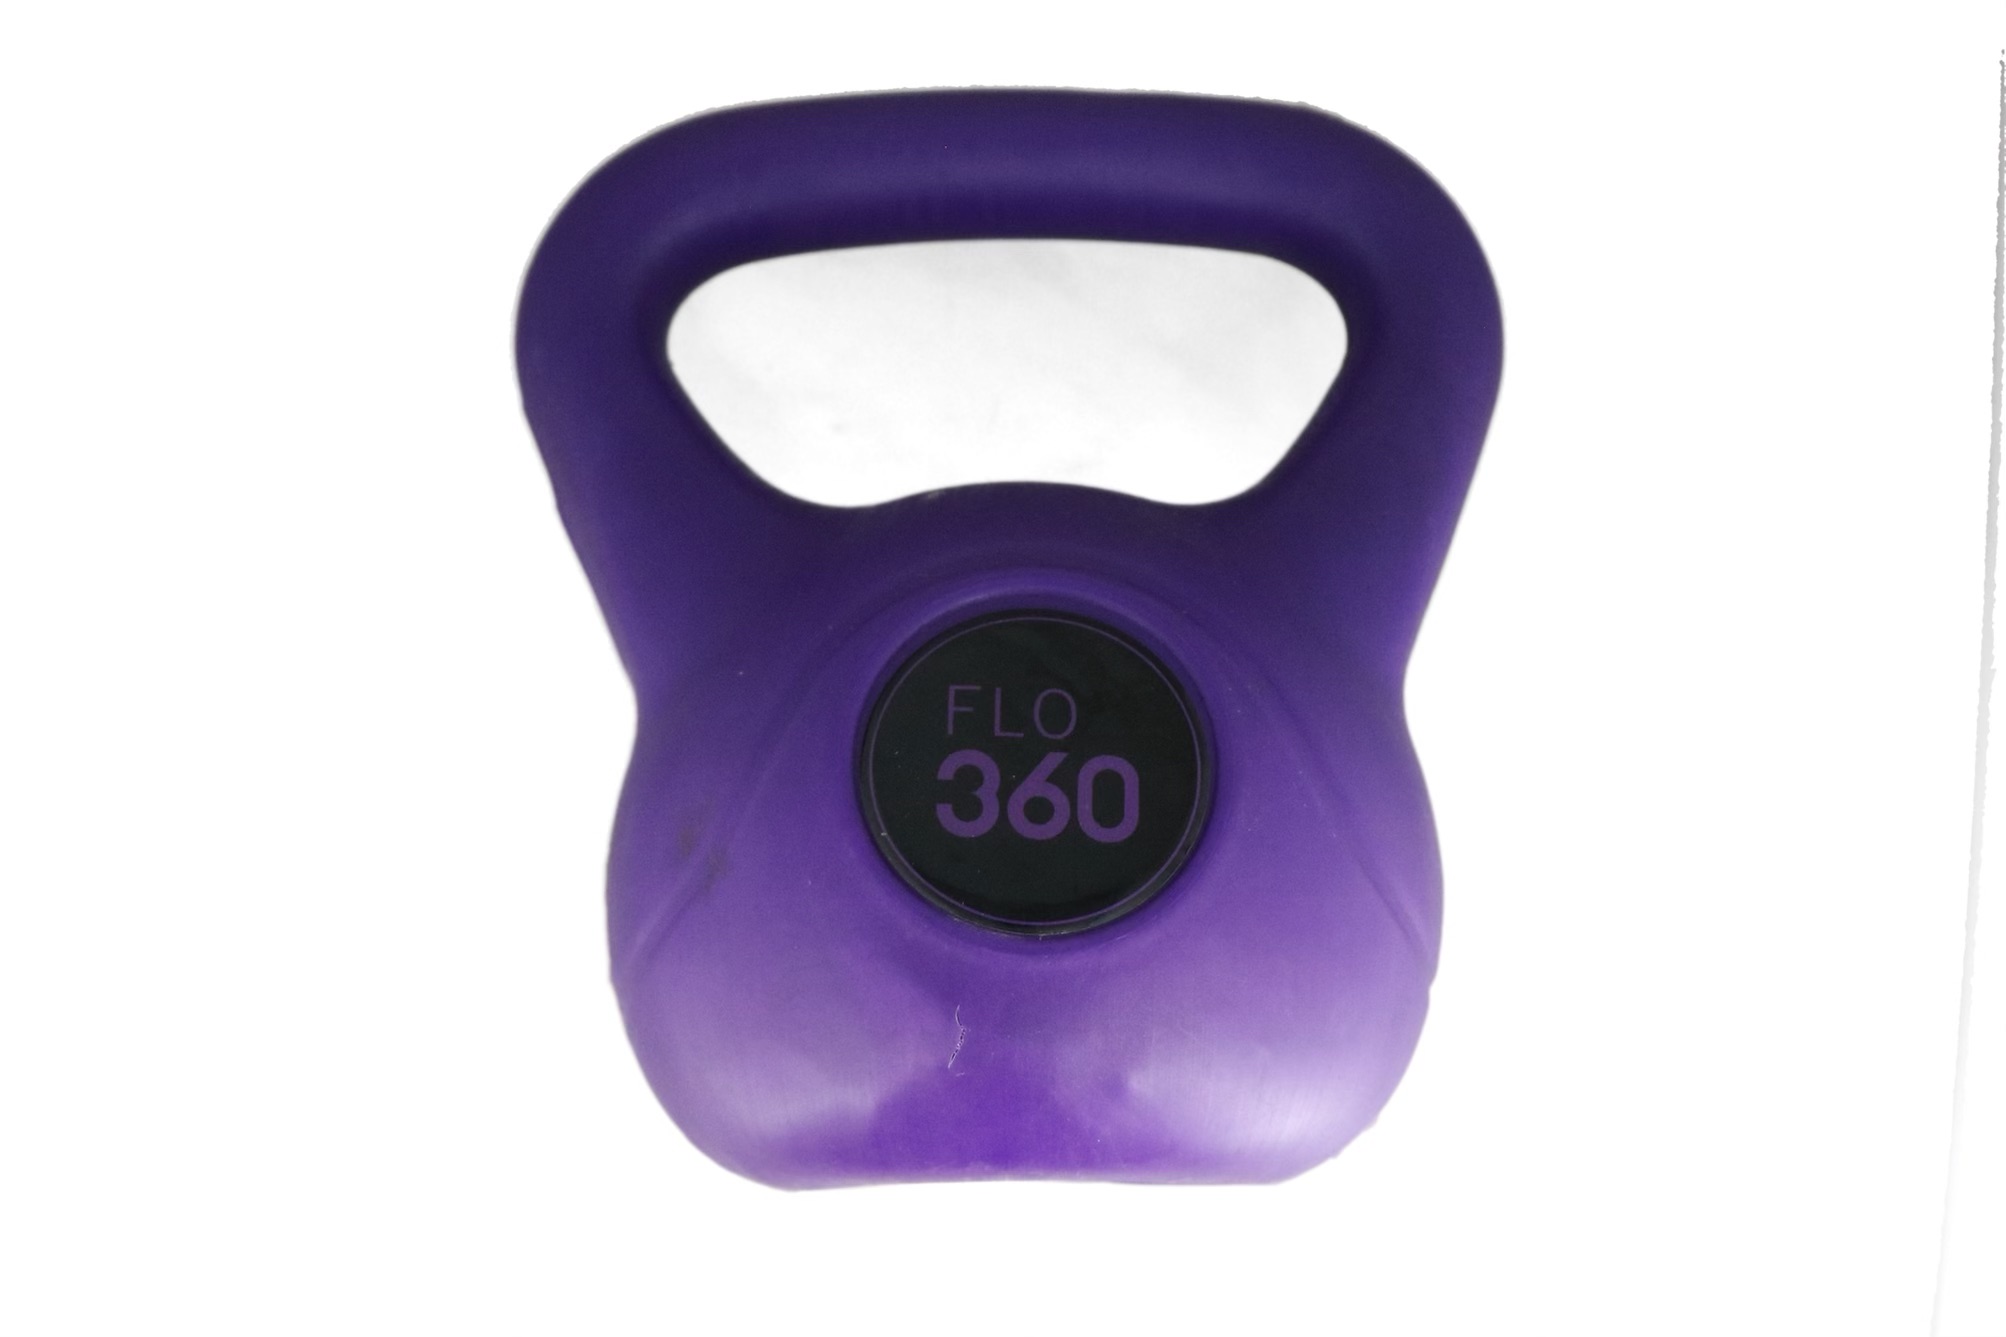 14.99 10 POUND KETTLE BELL